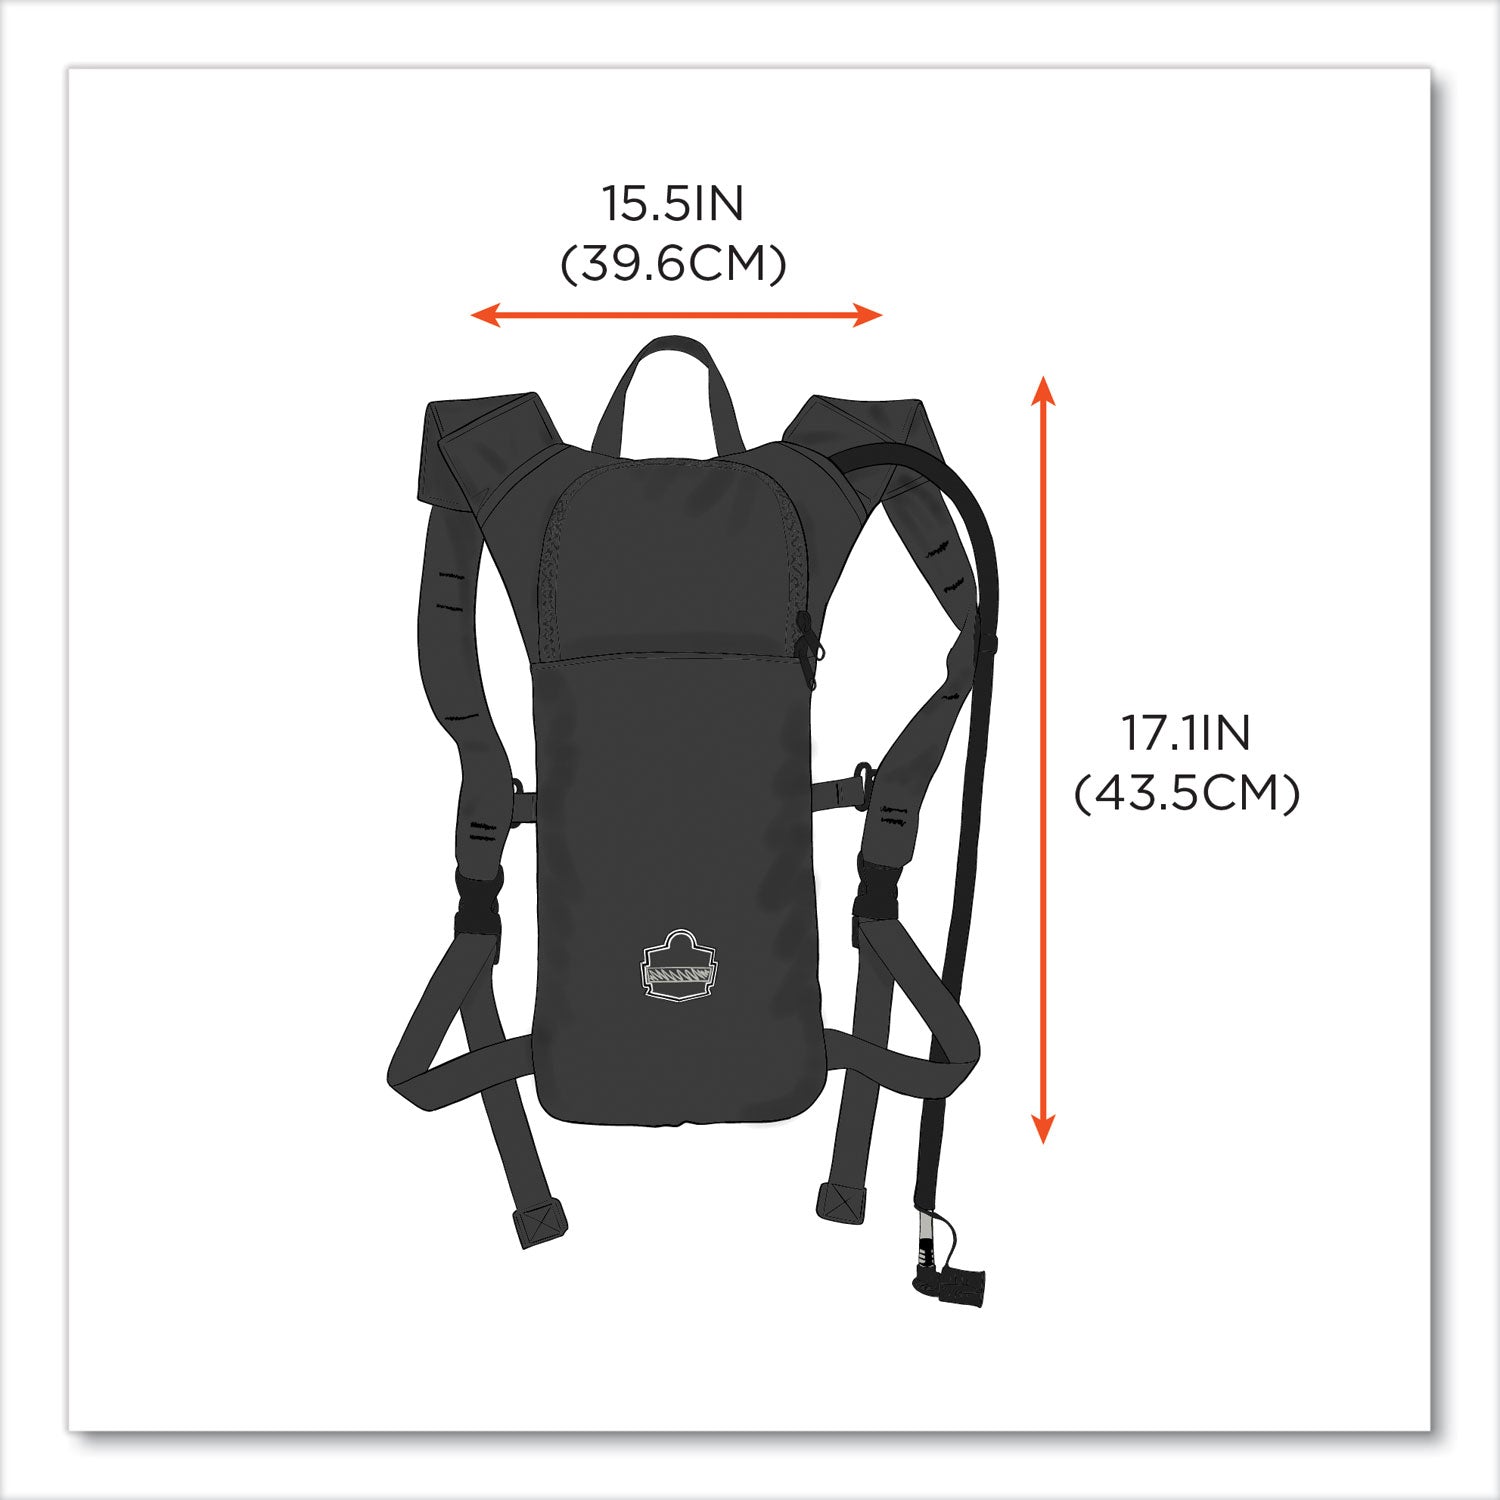 chill-its-5155-low-profile-hydration-pack-2-l-black-ships-in-1-3-business-days_ego13155 - 8